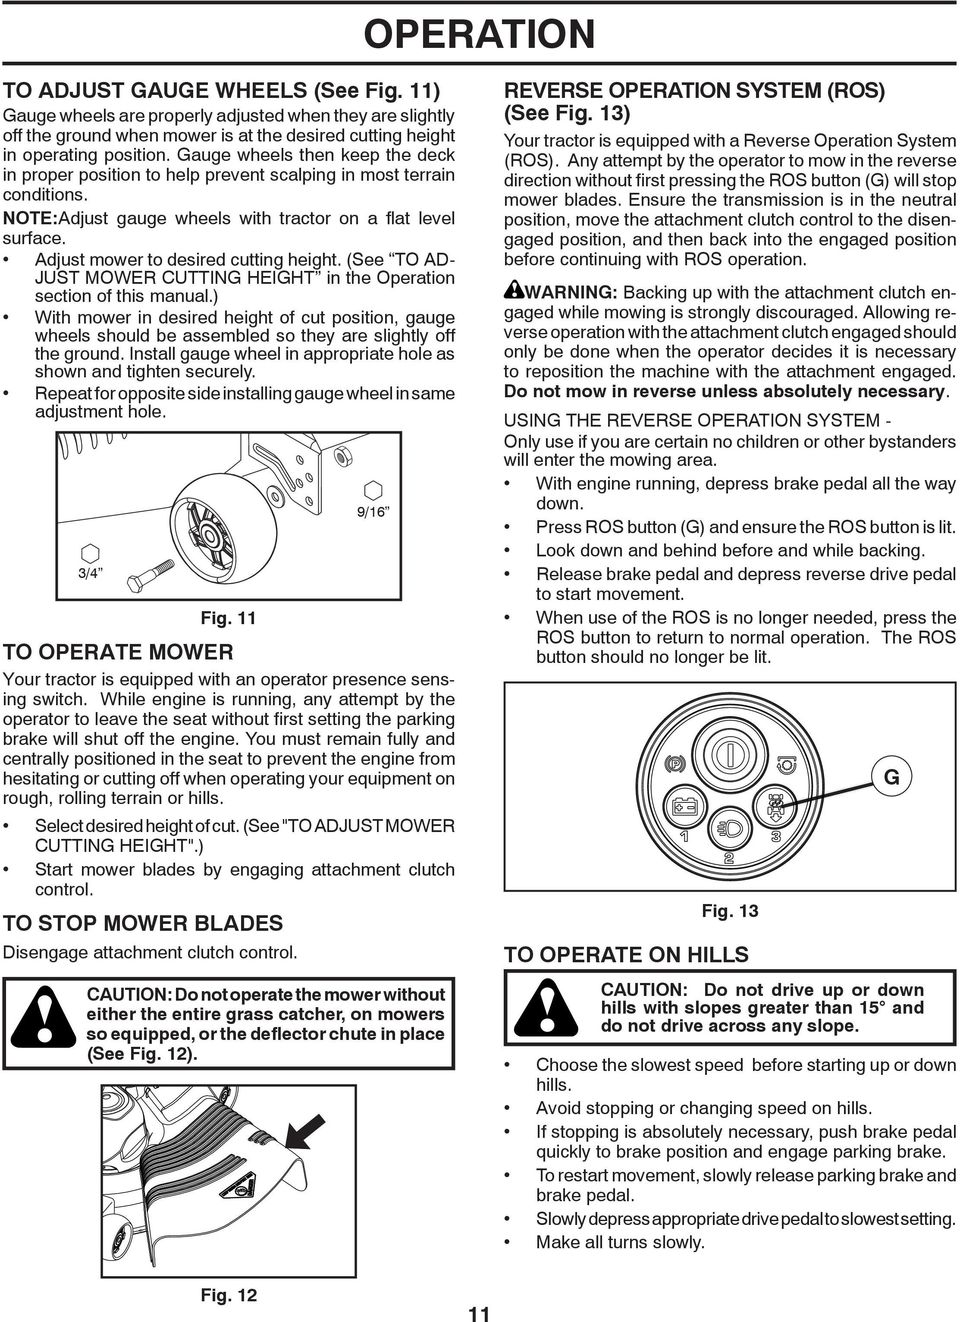 Adjust mower to desired cutting height. (See TO AD- JUST MOWER CUT TING HEIGHT in the Operation sec tion of this manual.